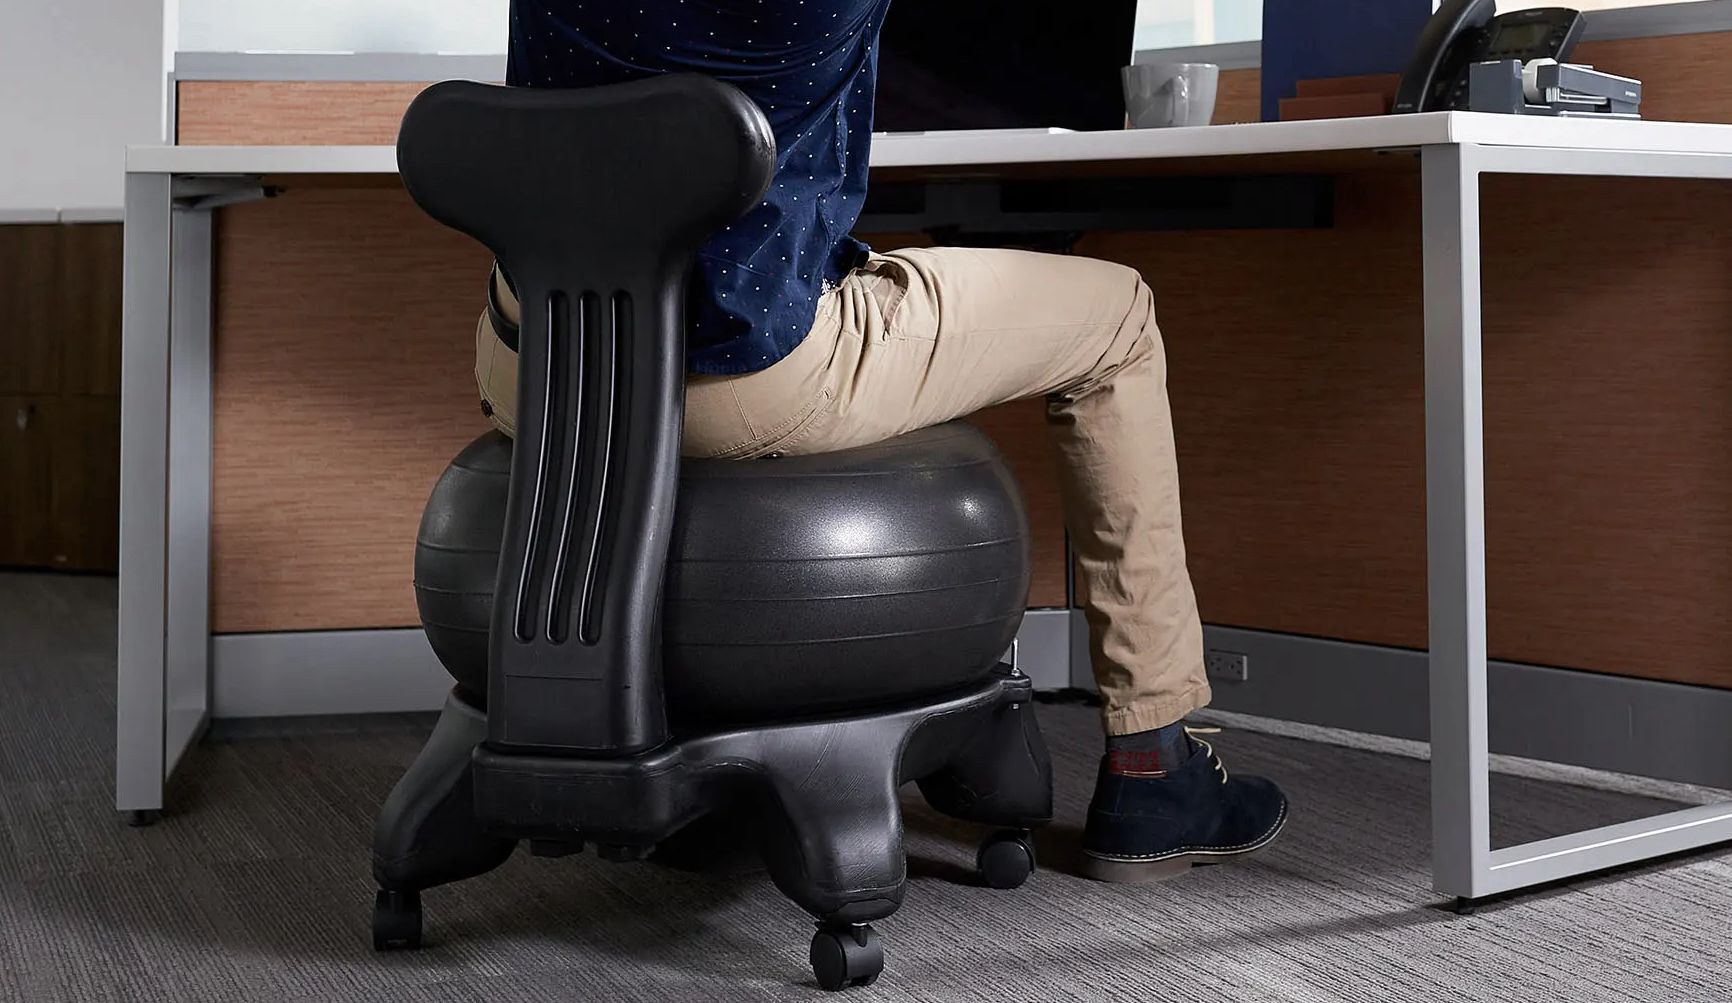 The Do's and Don'ts of Using a Yoga Ball Chair, According to Science